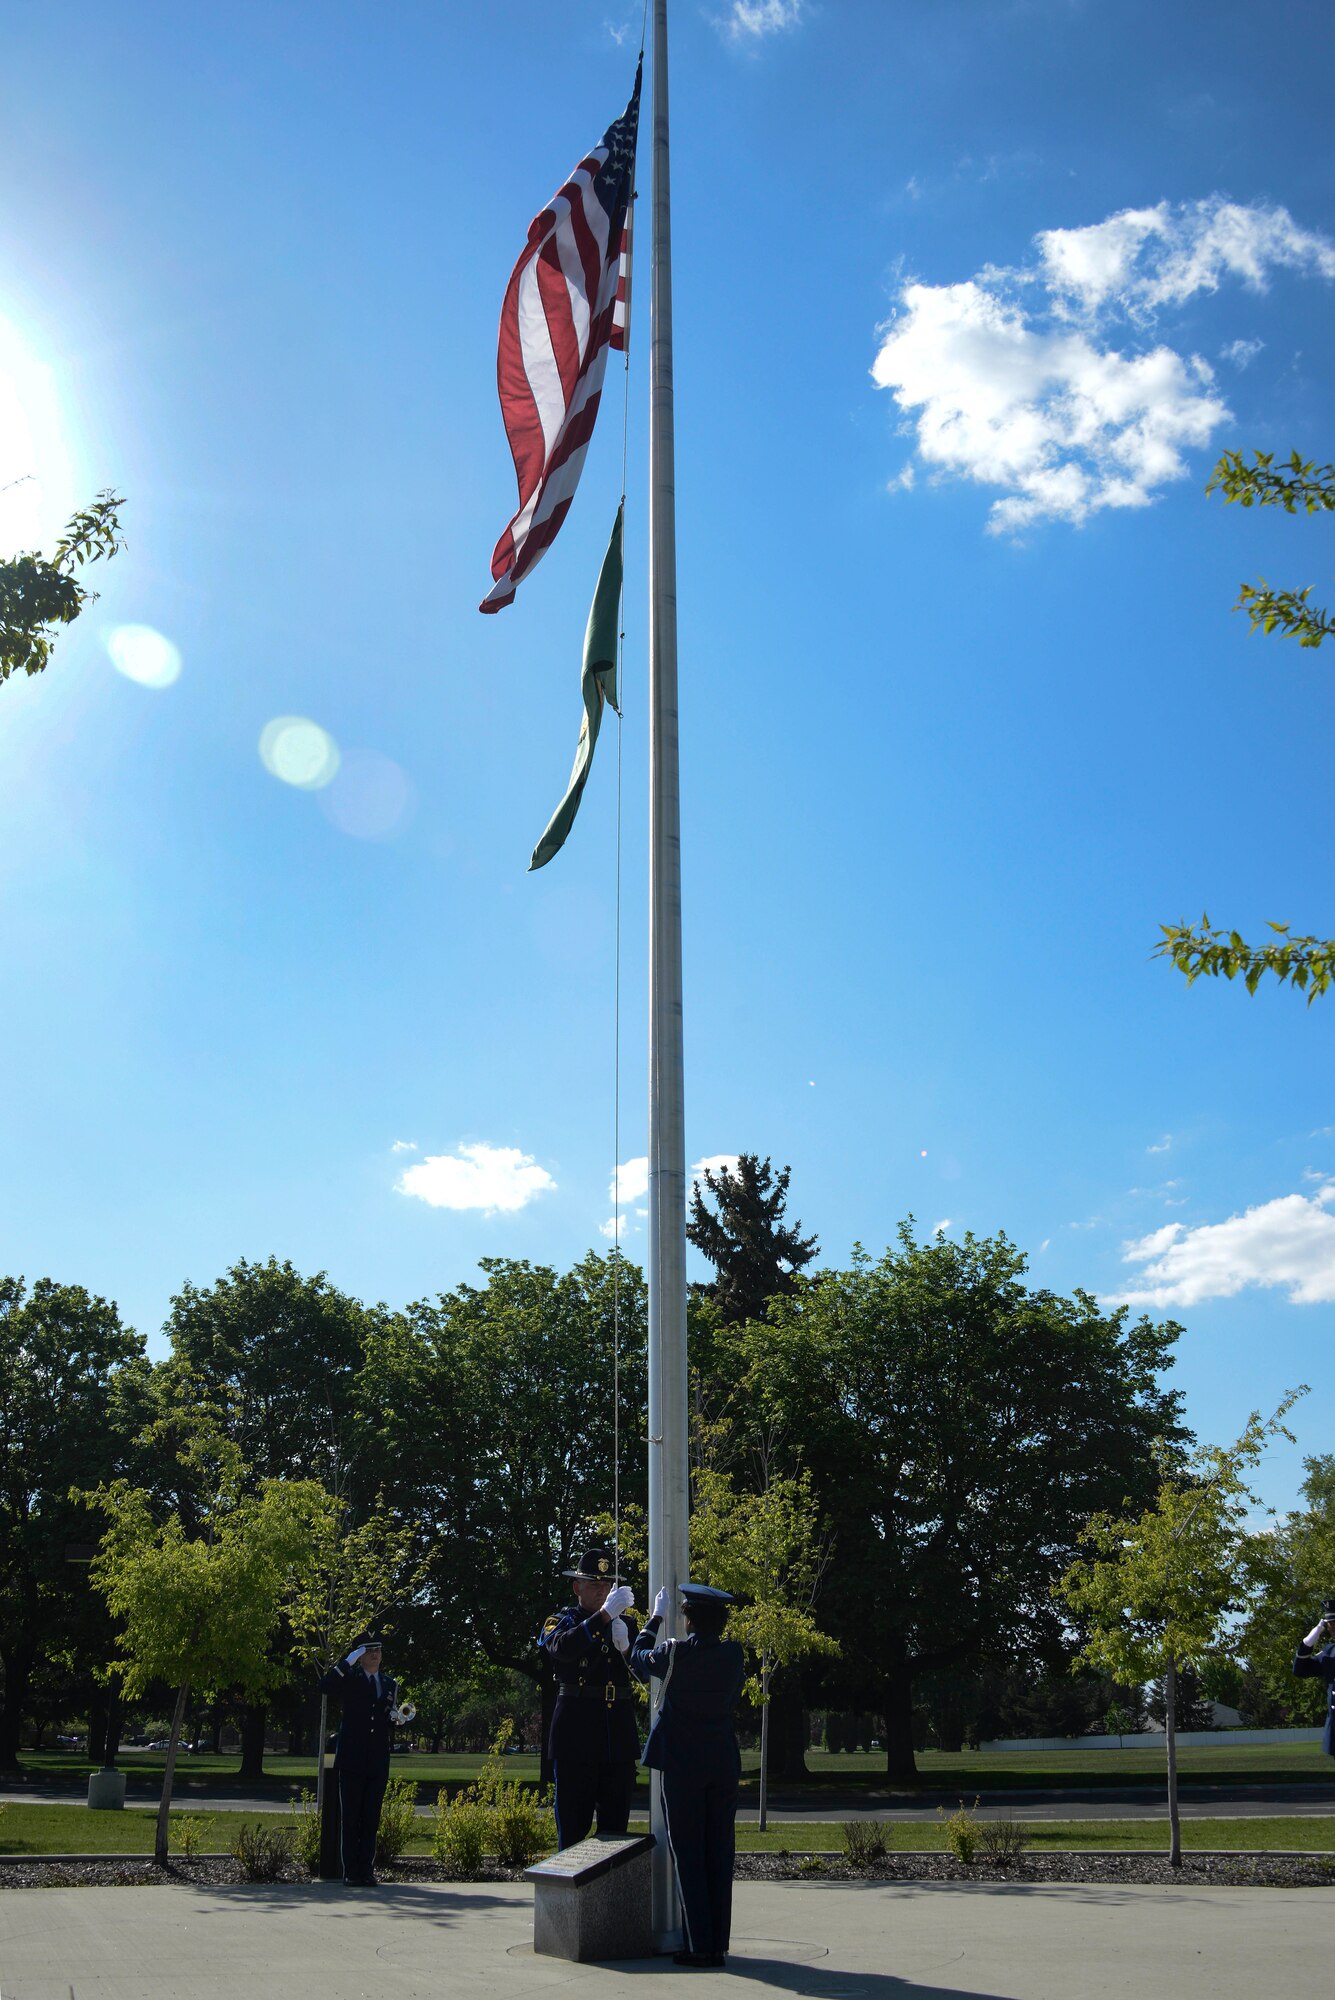 A member of the Fairchild Air Force Base Honor Guard and a law enforcement official lower the flag during a National Police Week Memorial Retreat Ceremony at Fairchild AFB, Washington, May 16, 2018. National Police Week pays recognition to law enforcement officers who lost their lives in the line of duty for the safety and protection of others.